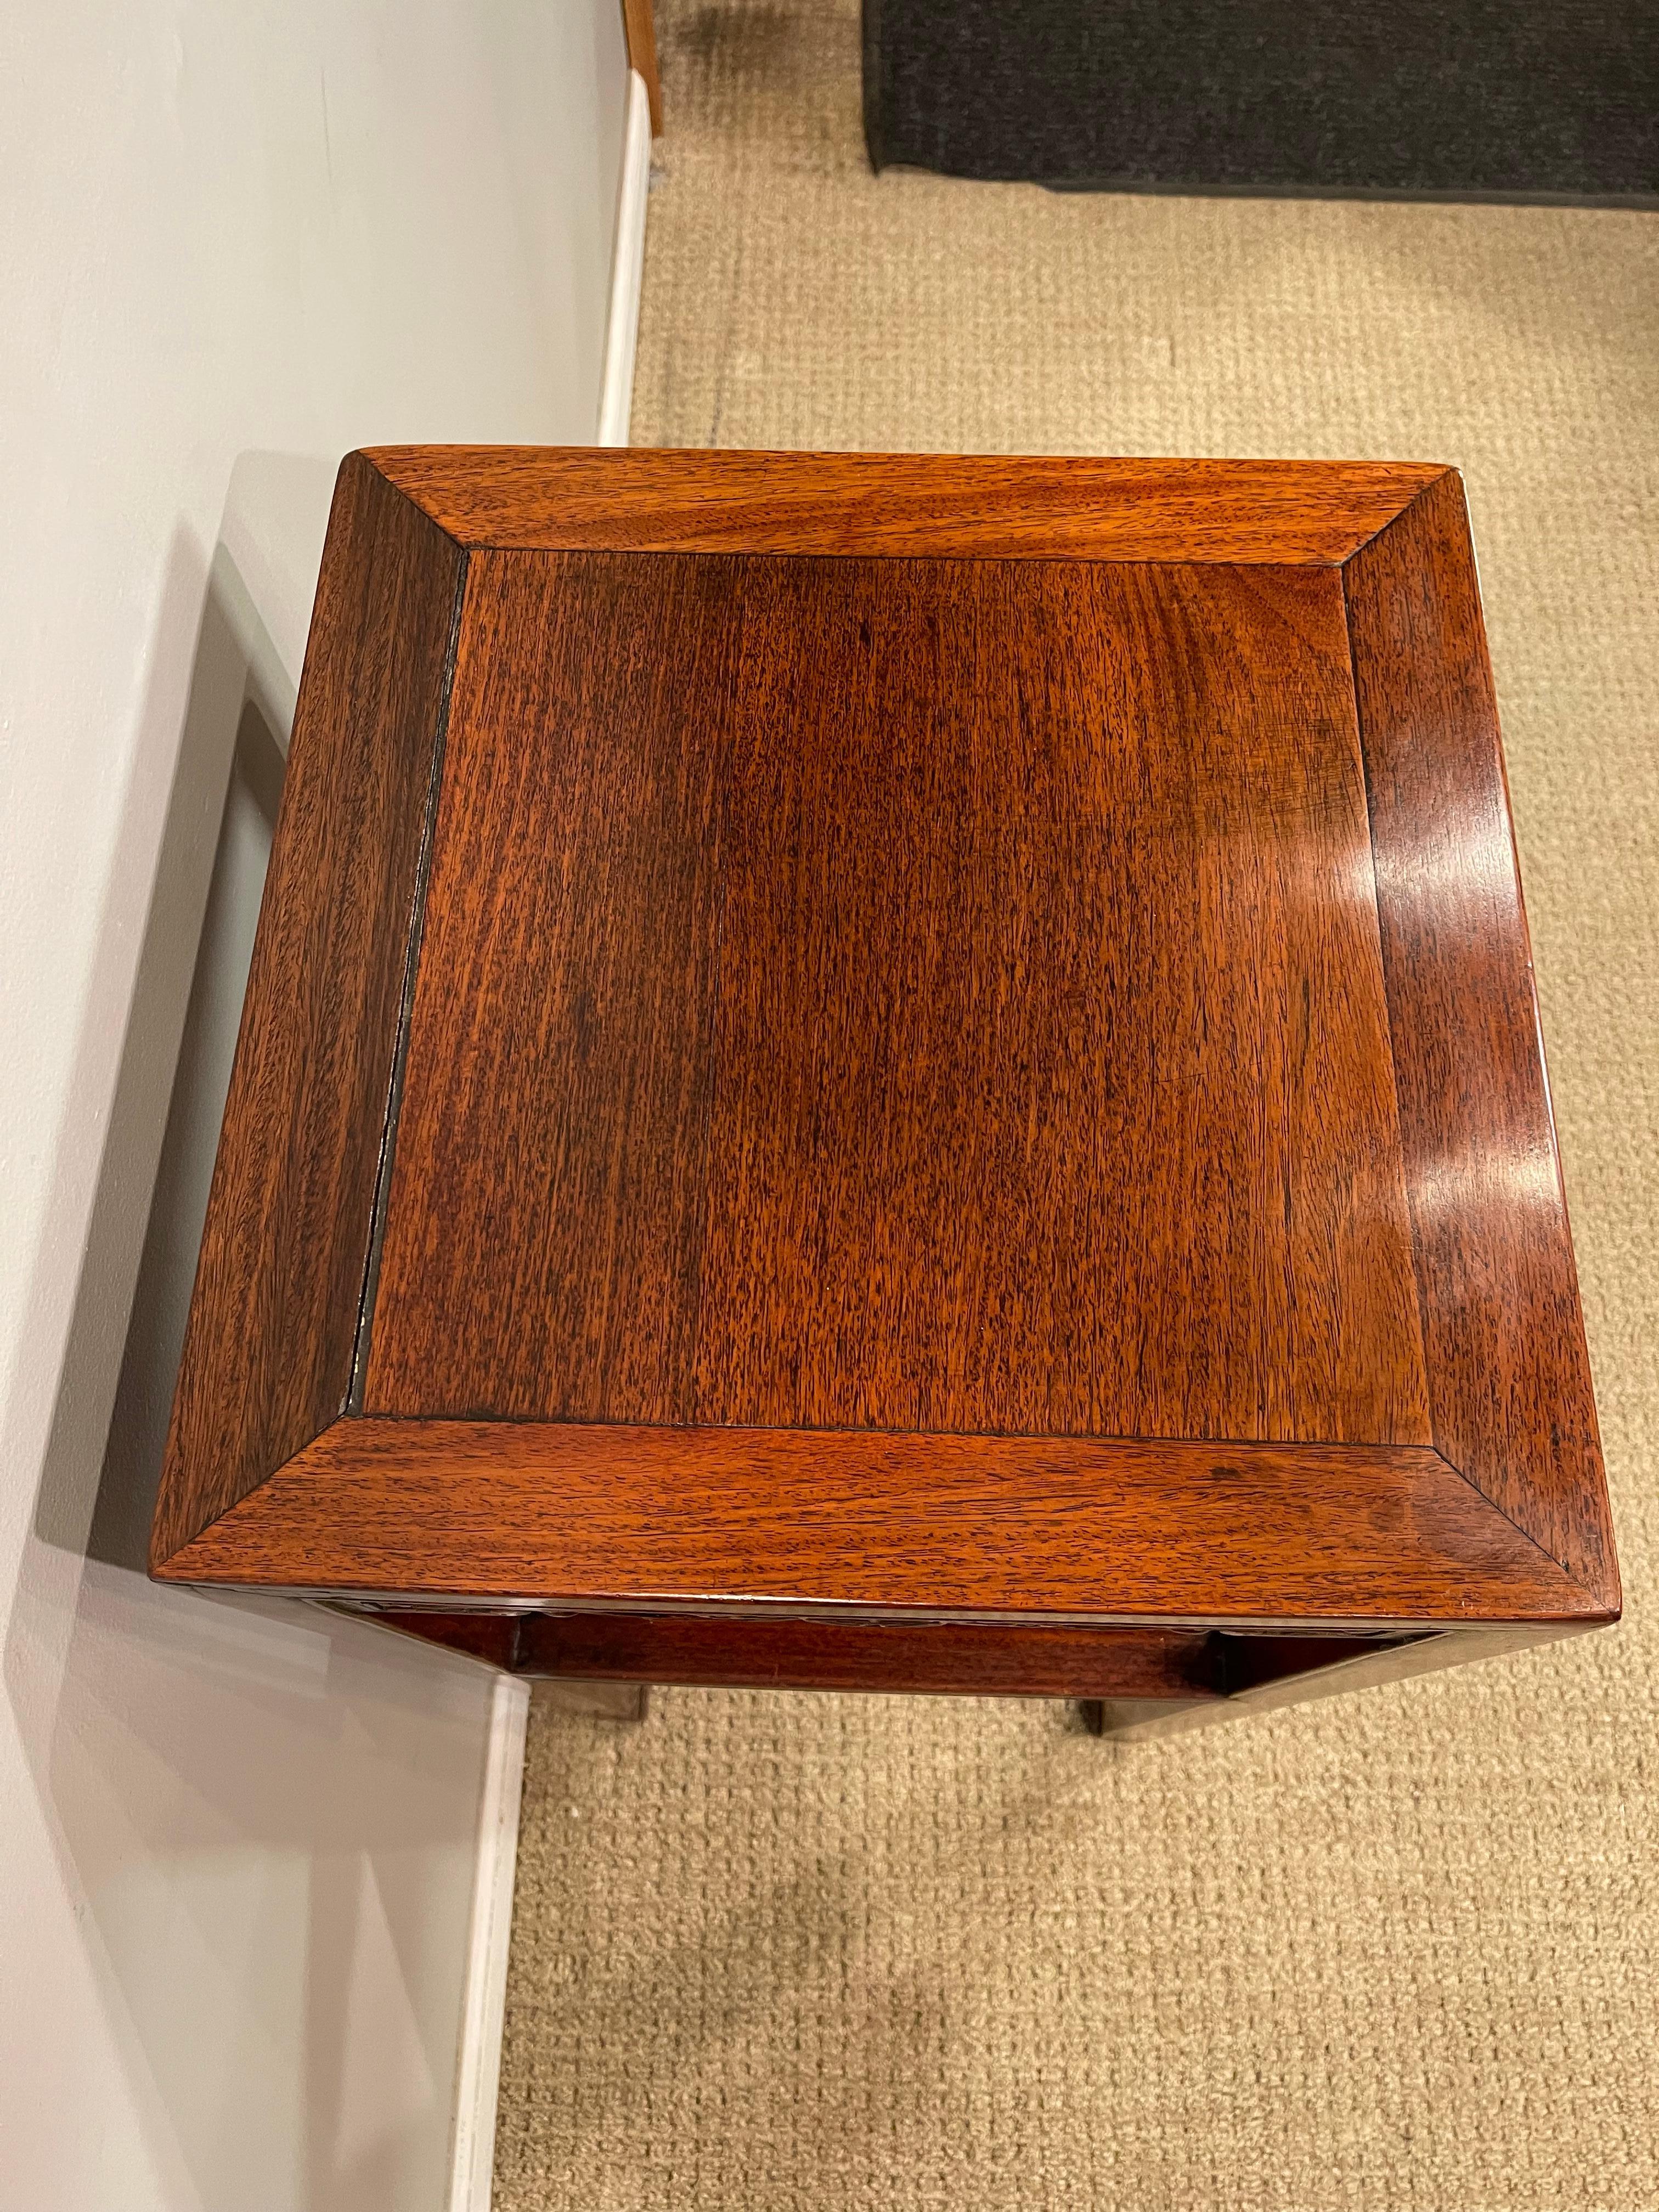 Chinese Hardwood 'Hungmu' Tea Table, Late 19th Century / Early 20th Century For Sale 6